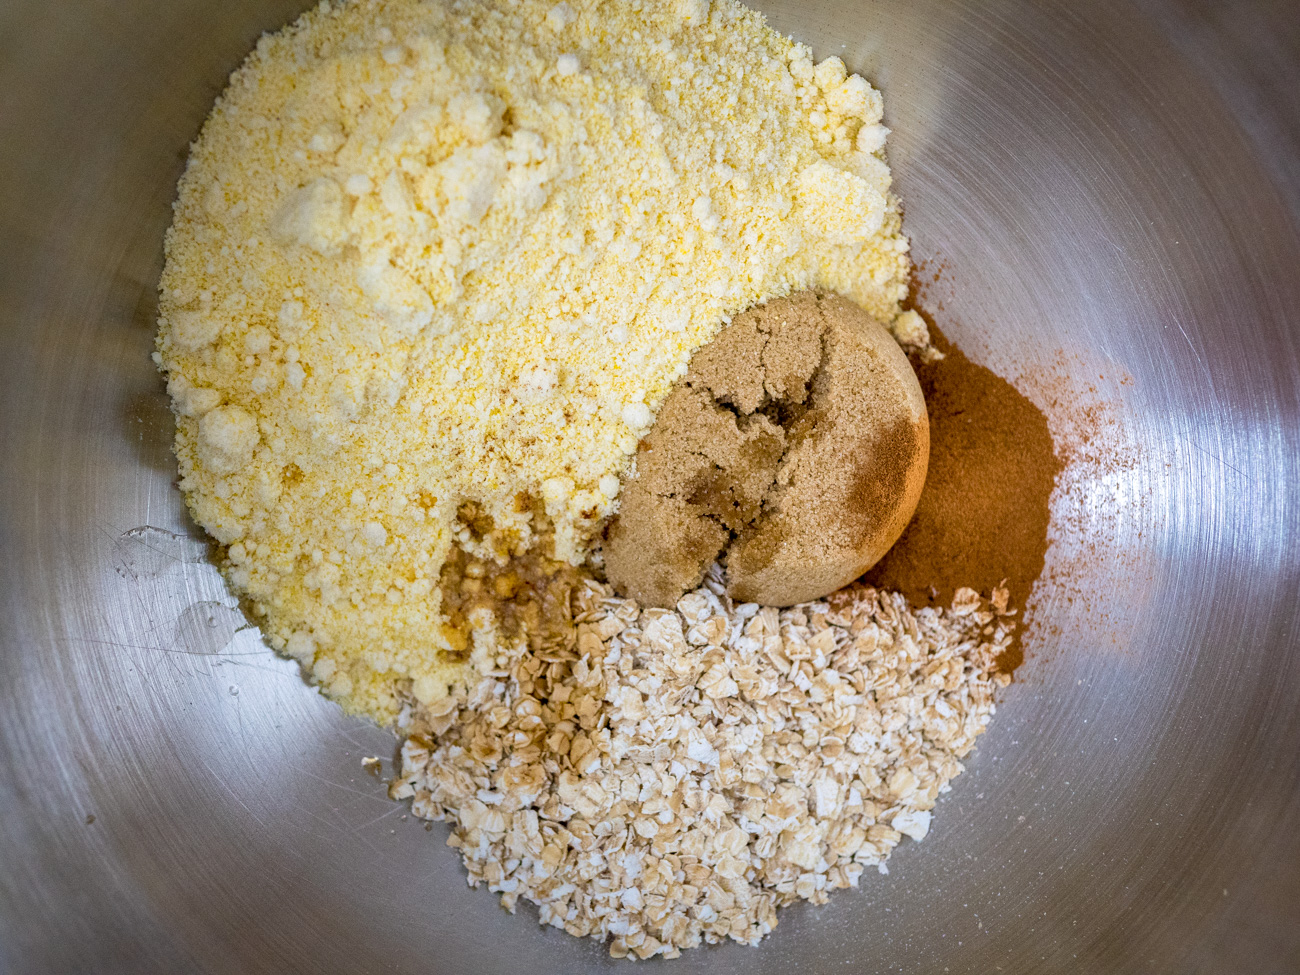 In a separate large bowl combine oats, cornbread mix, cinnamon, vanilla, and brown sugar. Cut in butter with fork or pastry knife until crumbly.